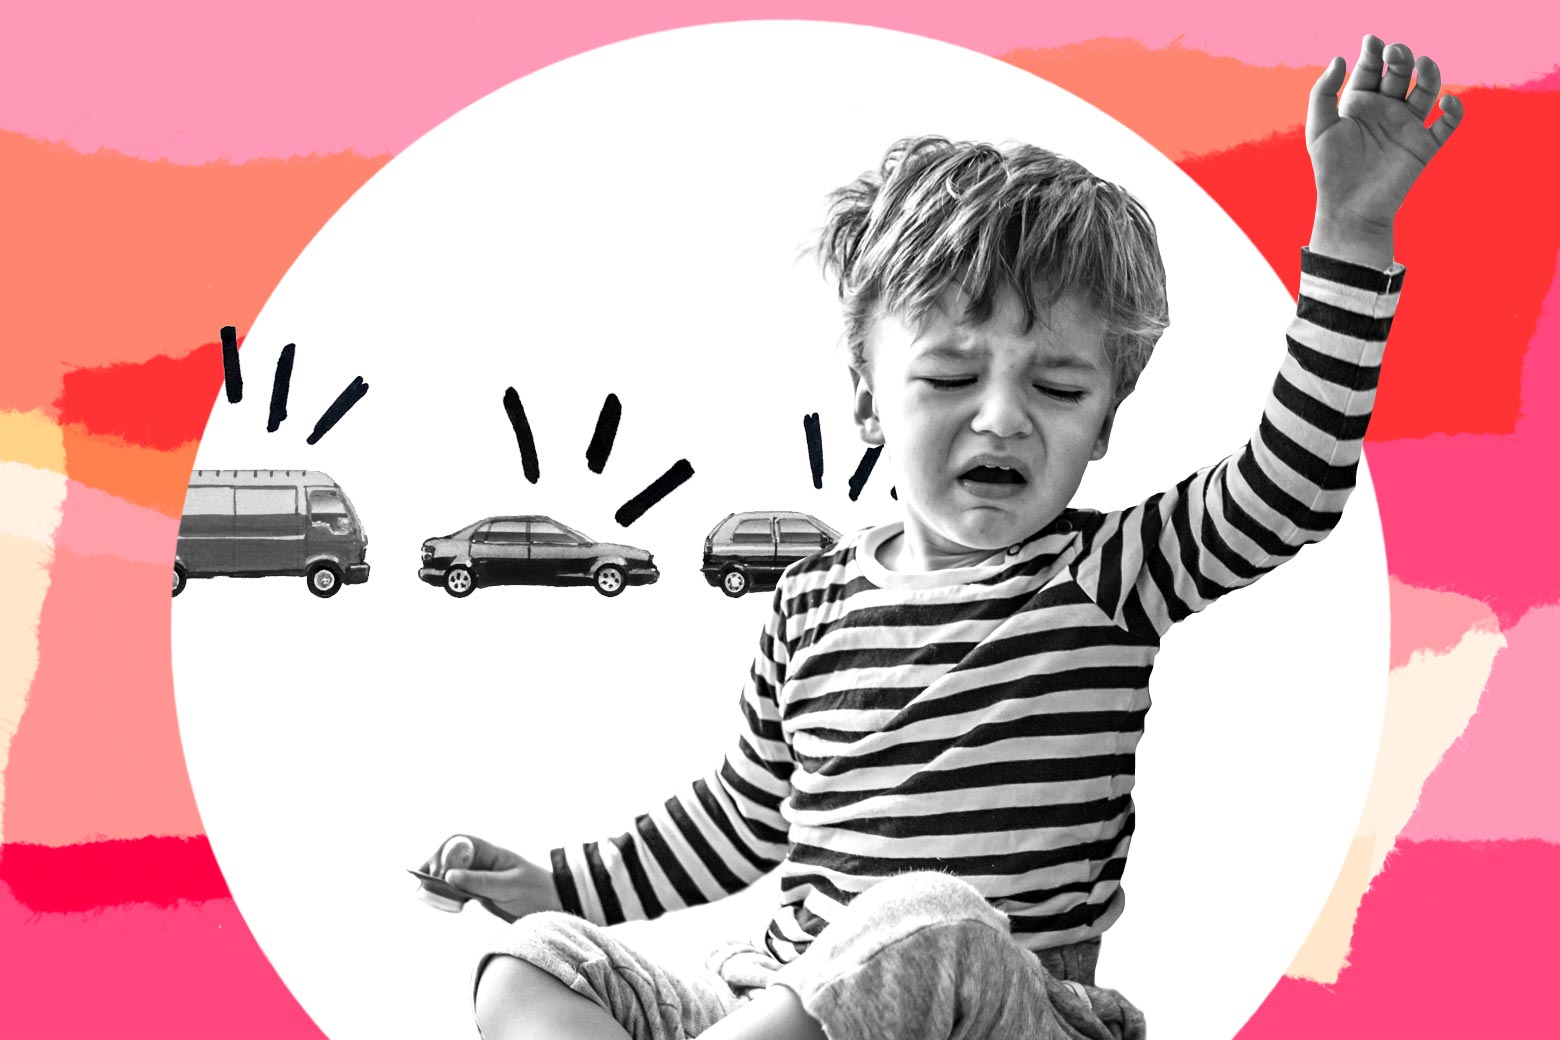 Collage of a toddler waking up crying beside a line of cars, with honking lines beeping from each car.